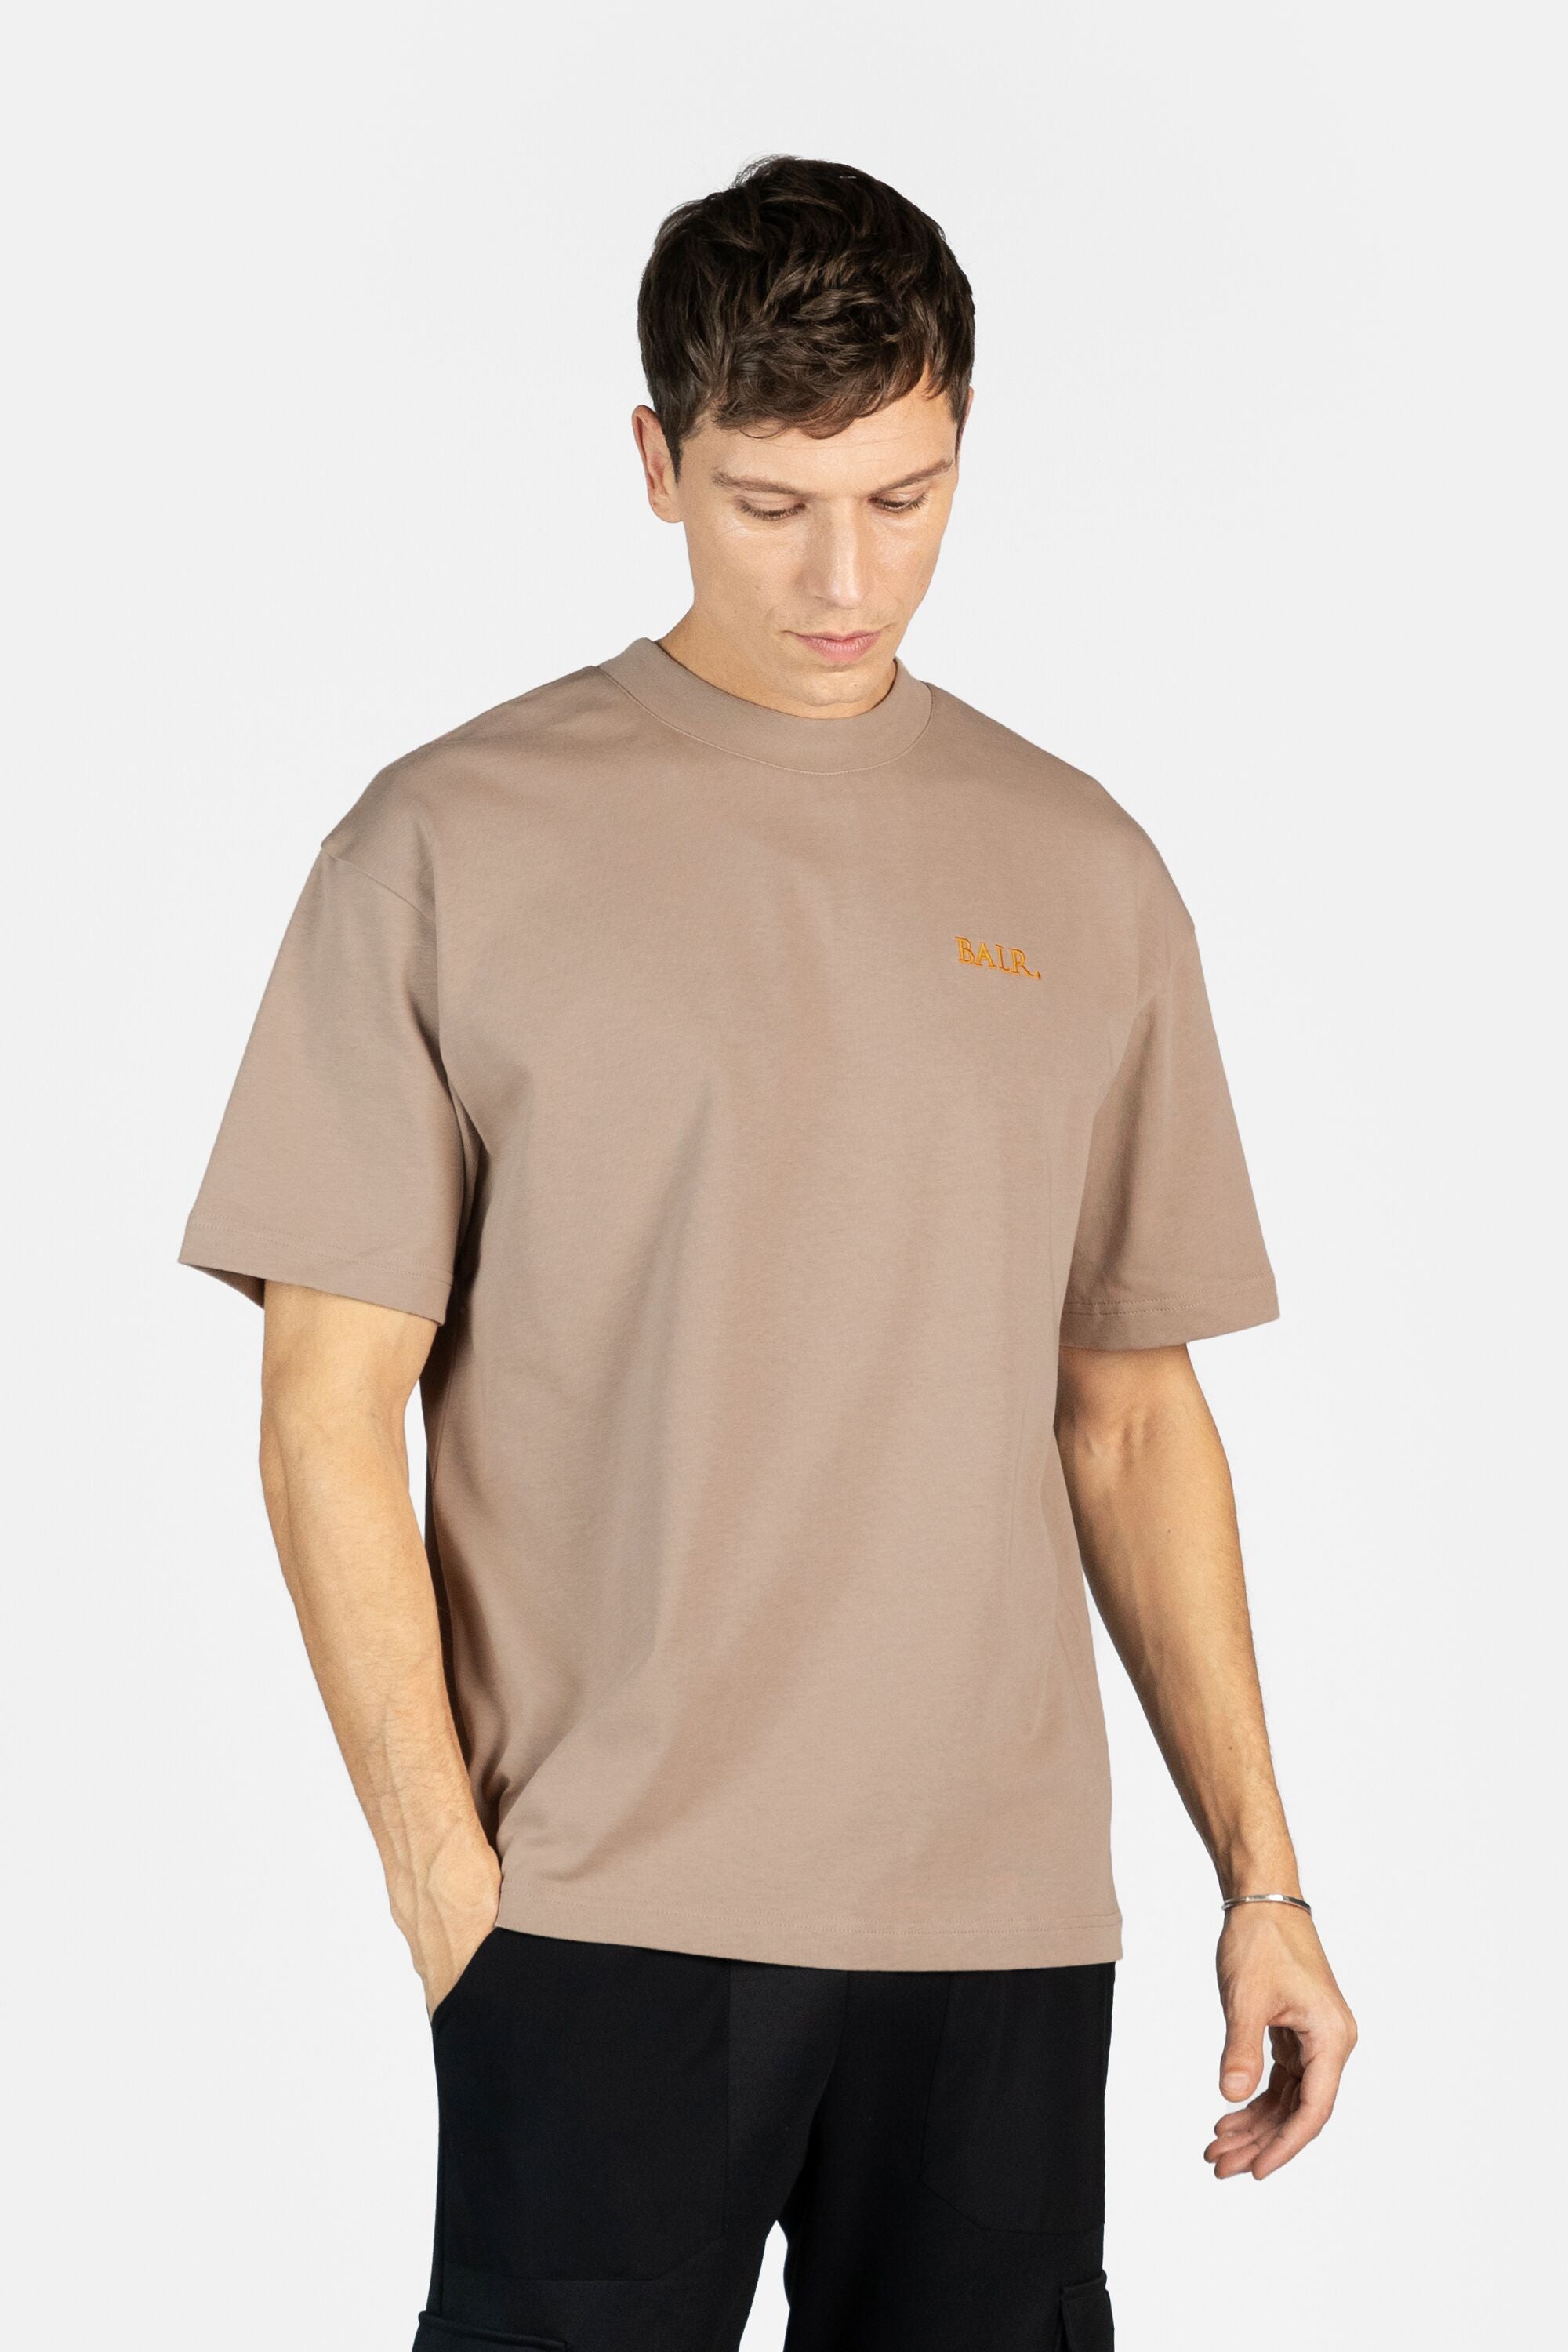 Game of the Gods Box Fit T-Shirt Warm Taupe